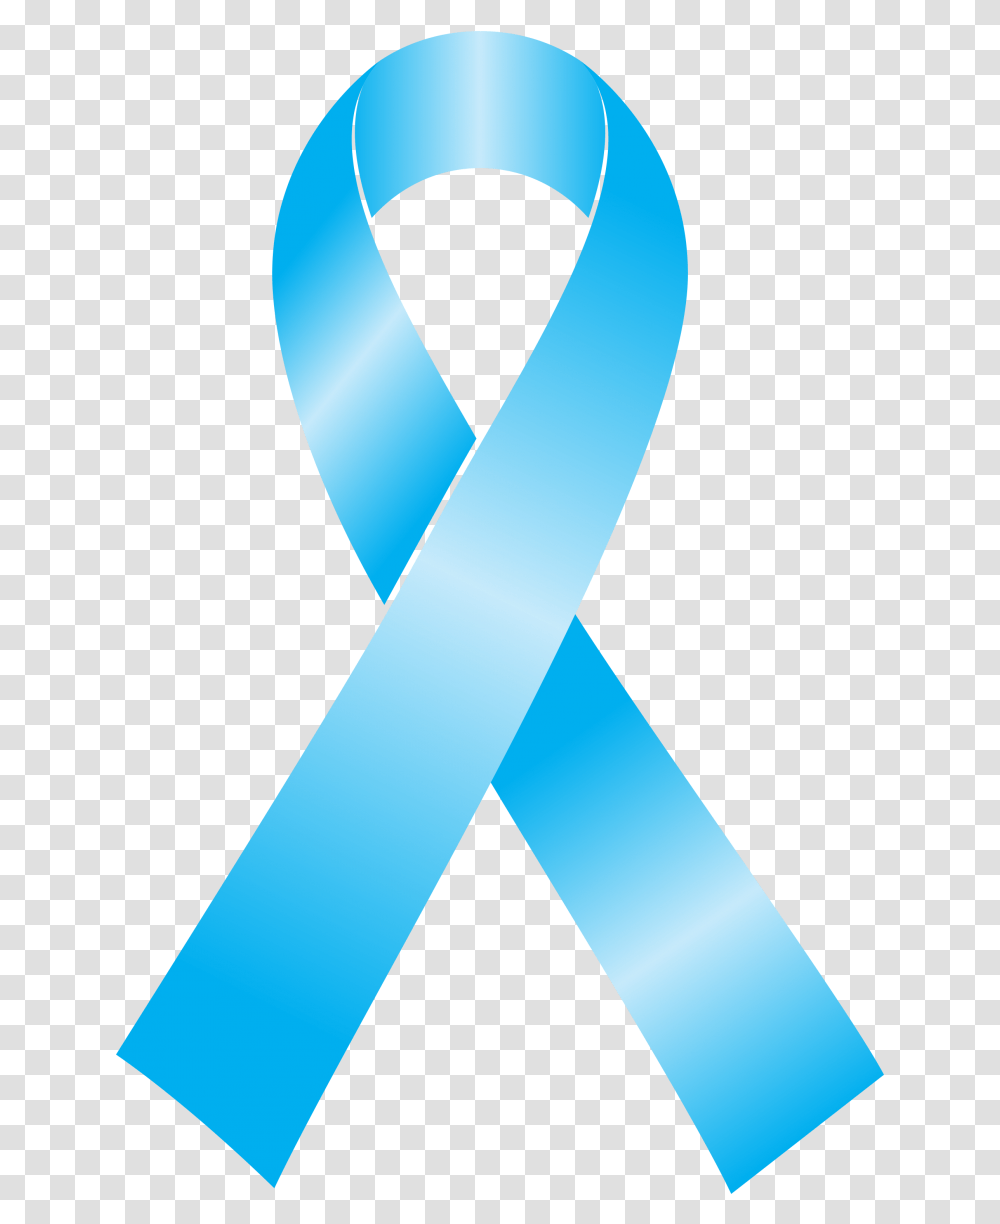 Prostate Cancer Awareness Ribbon Breast Blue Ribbon Prostate Cancer Ribbon Background, Triangle, Belt, Accessories Transparent Png